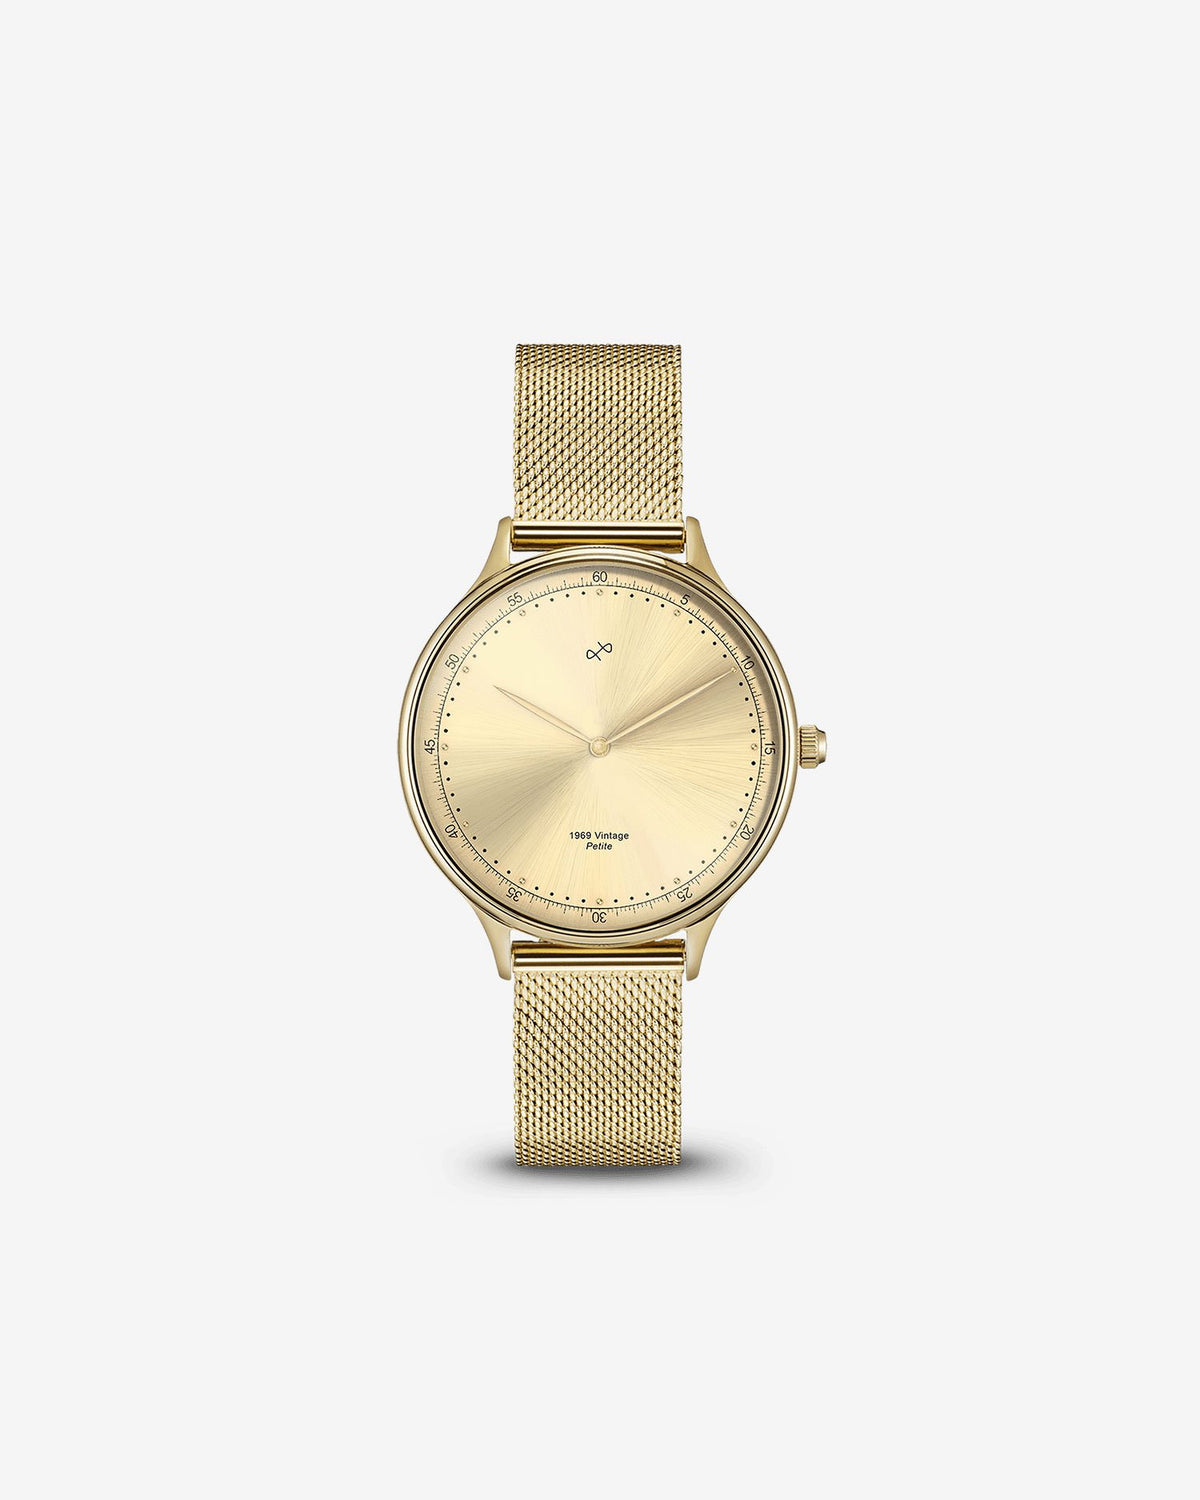 About Vintage - 1969 Petite, Gold / Gold Sunray #Strap_Mesh Gold